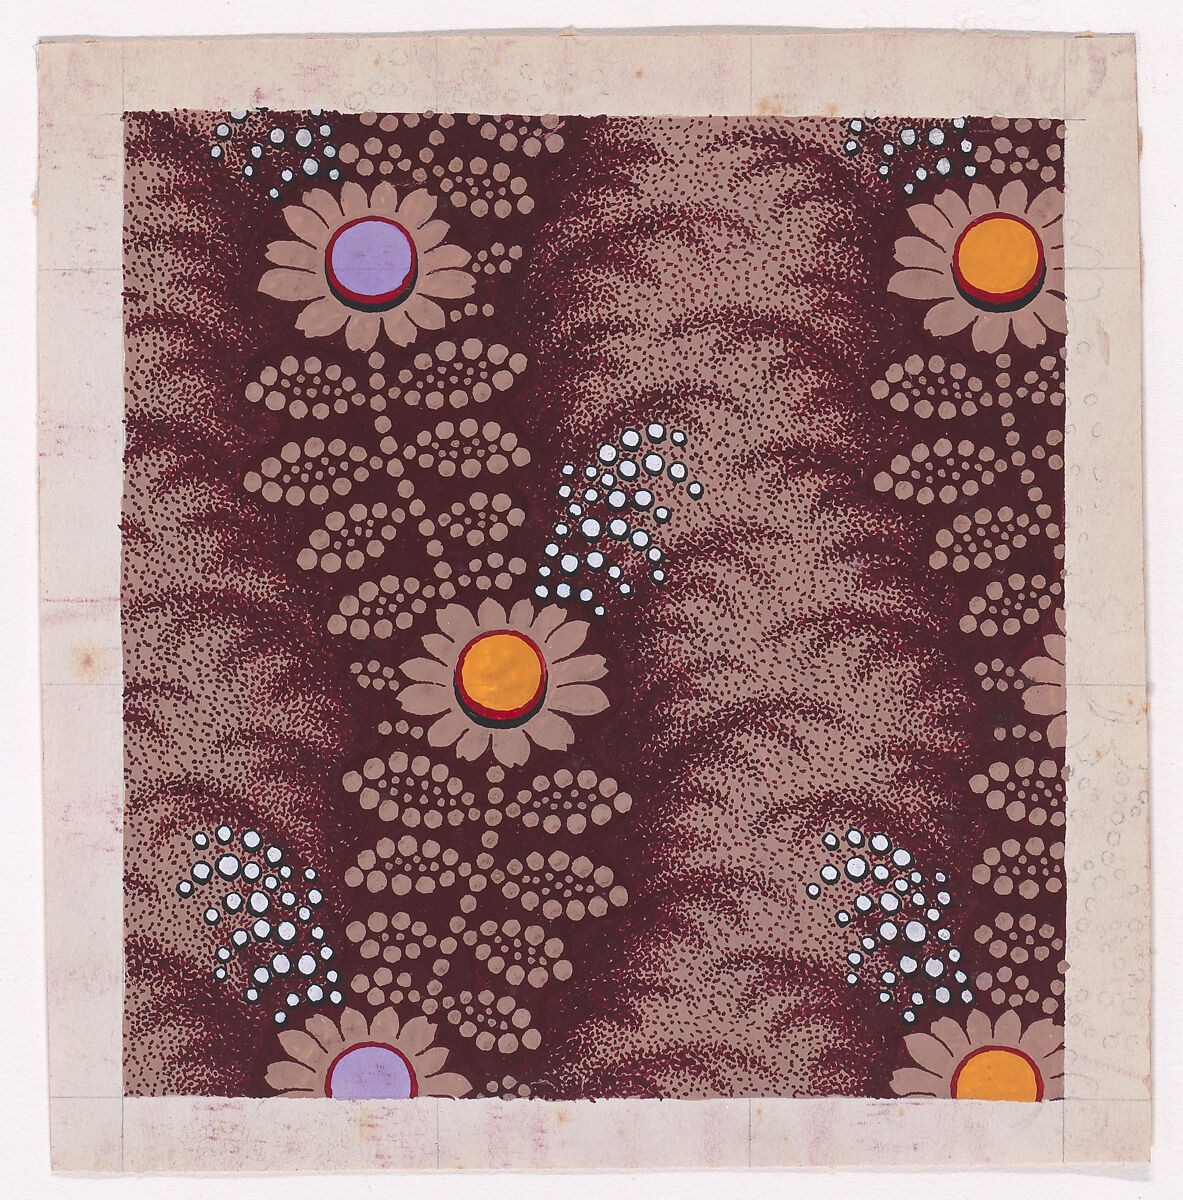 Textile Design with Vertical Undulating Garlands of Stylized Daisies with Pearls and Leaves over a Stippled Background, Anonymous, Alsatian, 19th century, Gouache 